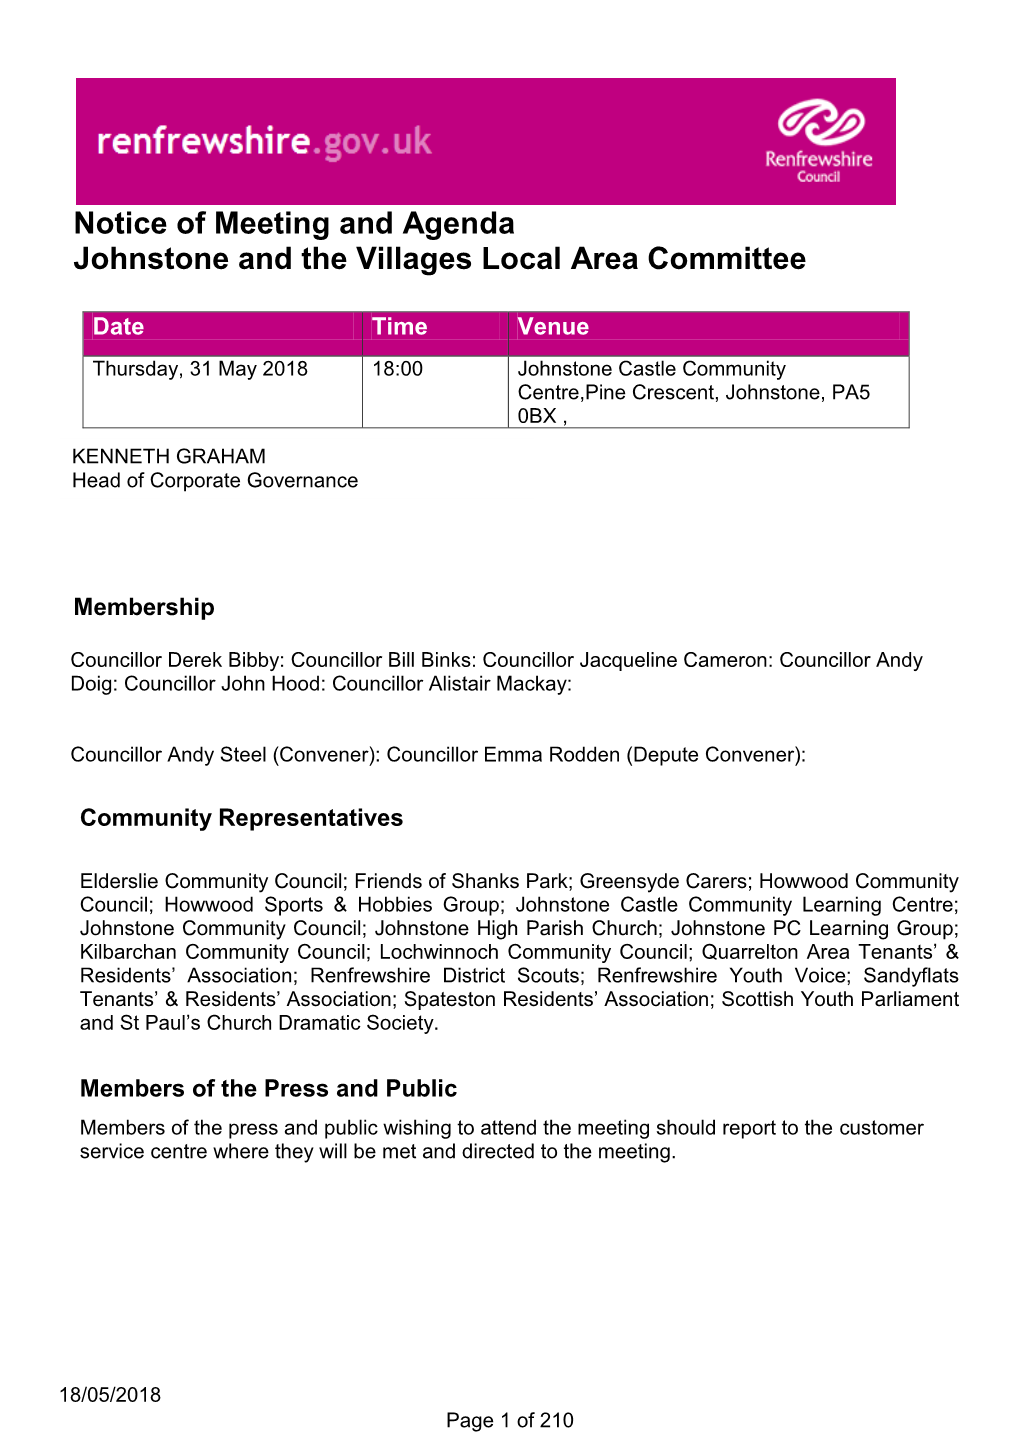 Notice of Meeting and Agenda Johnstone and the Villages Local Area Committee